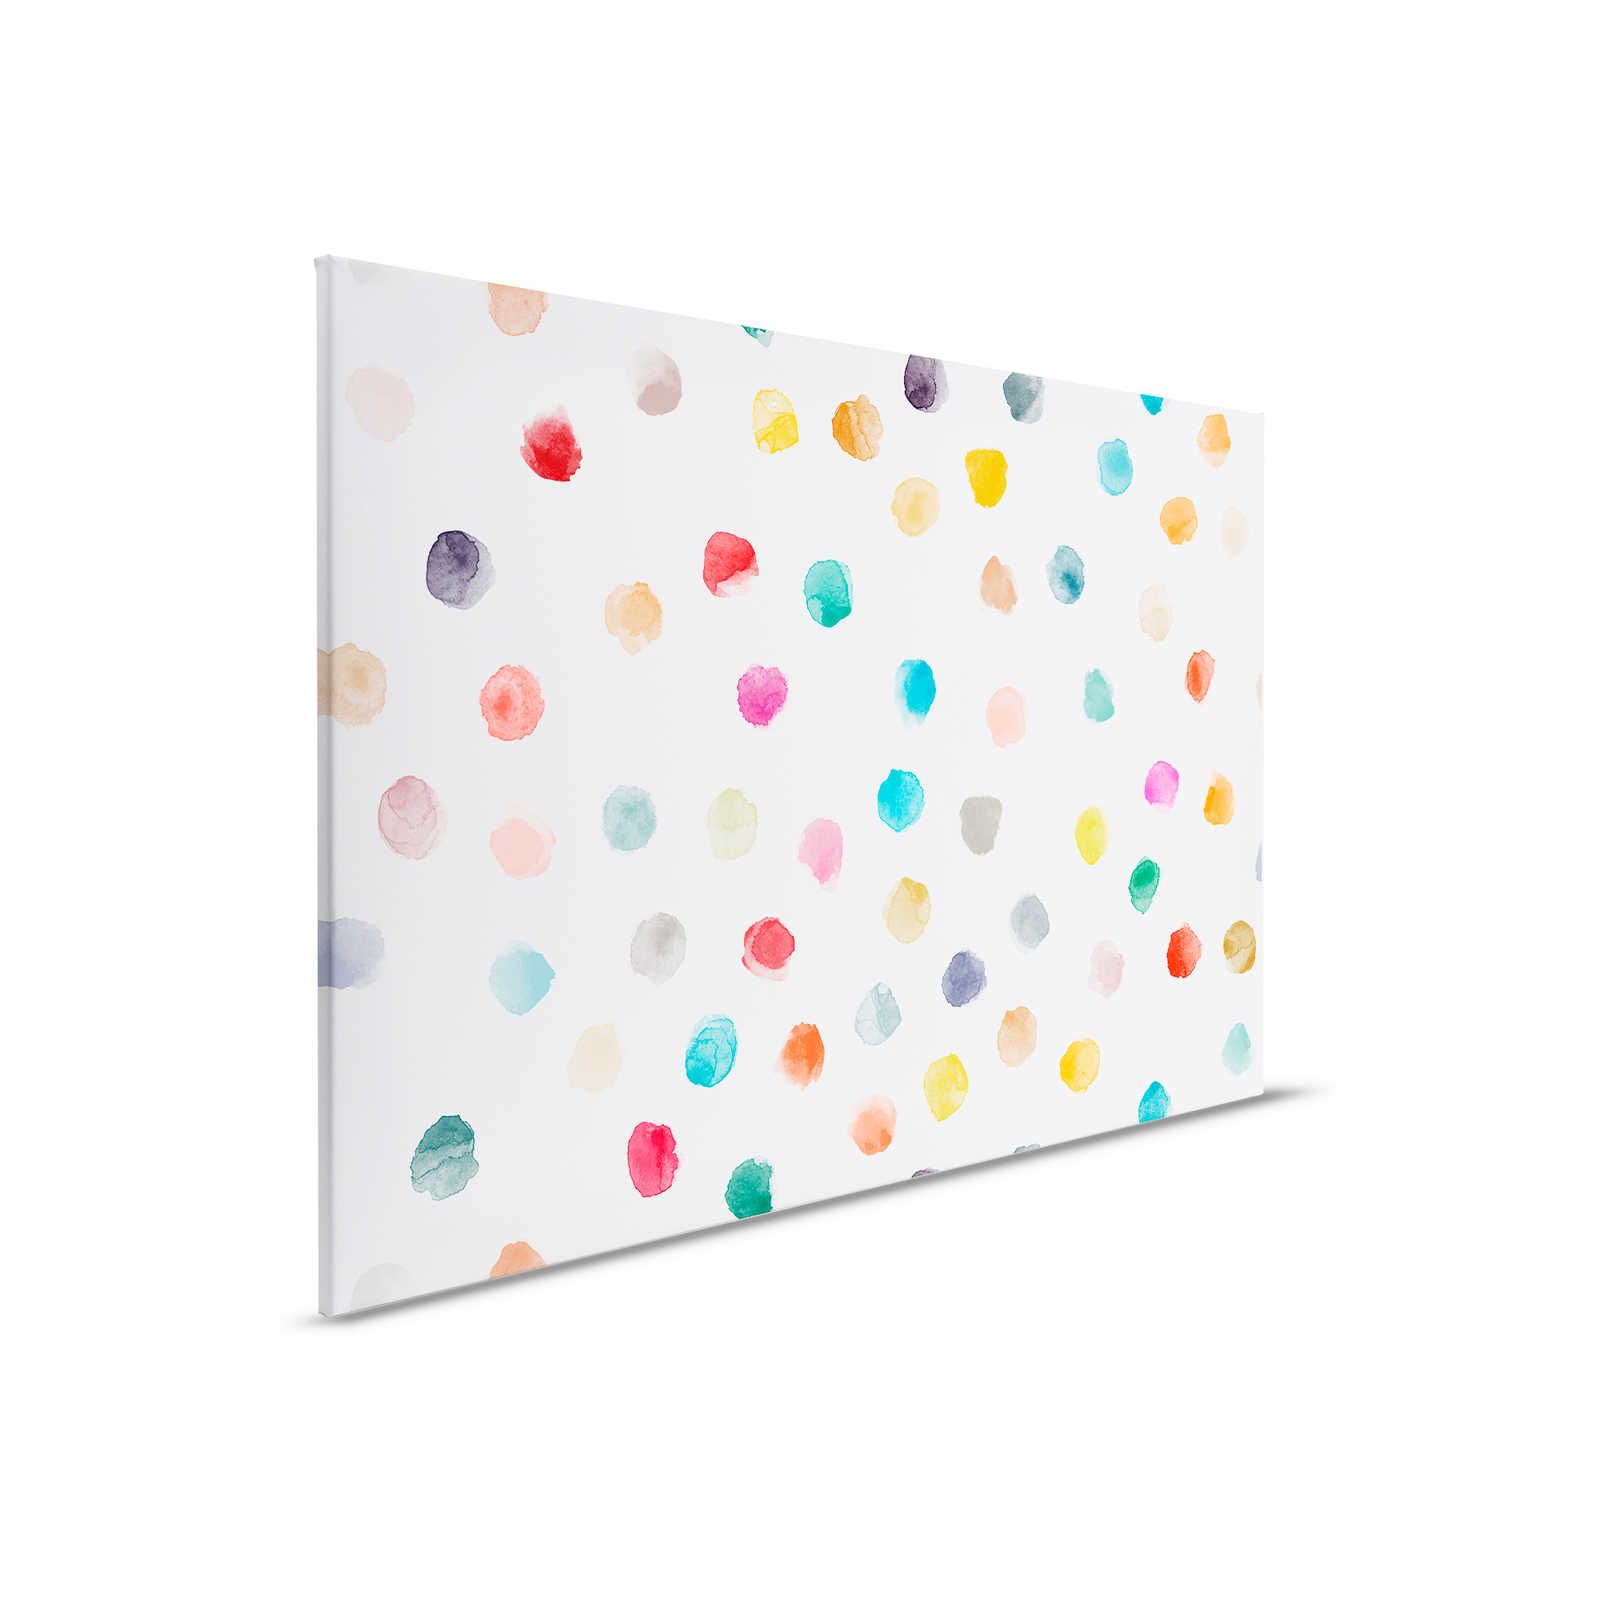         Canvas for children's room with colourful dots - 90 cm x 60 cm
    